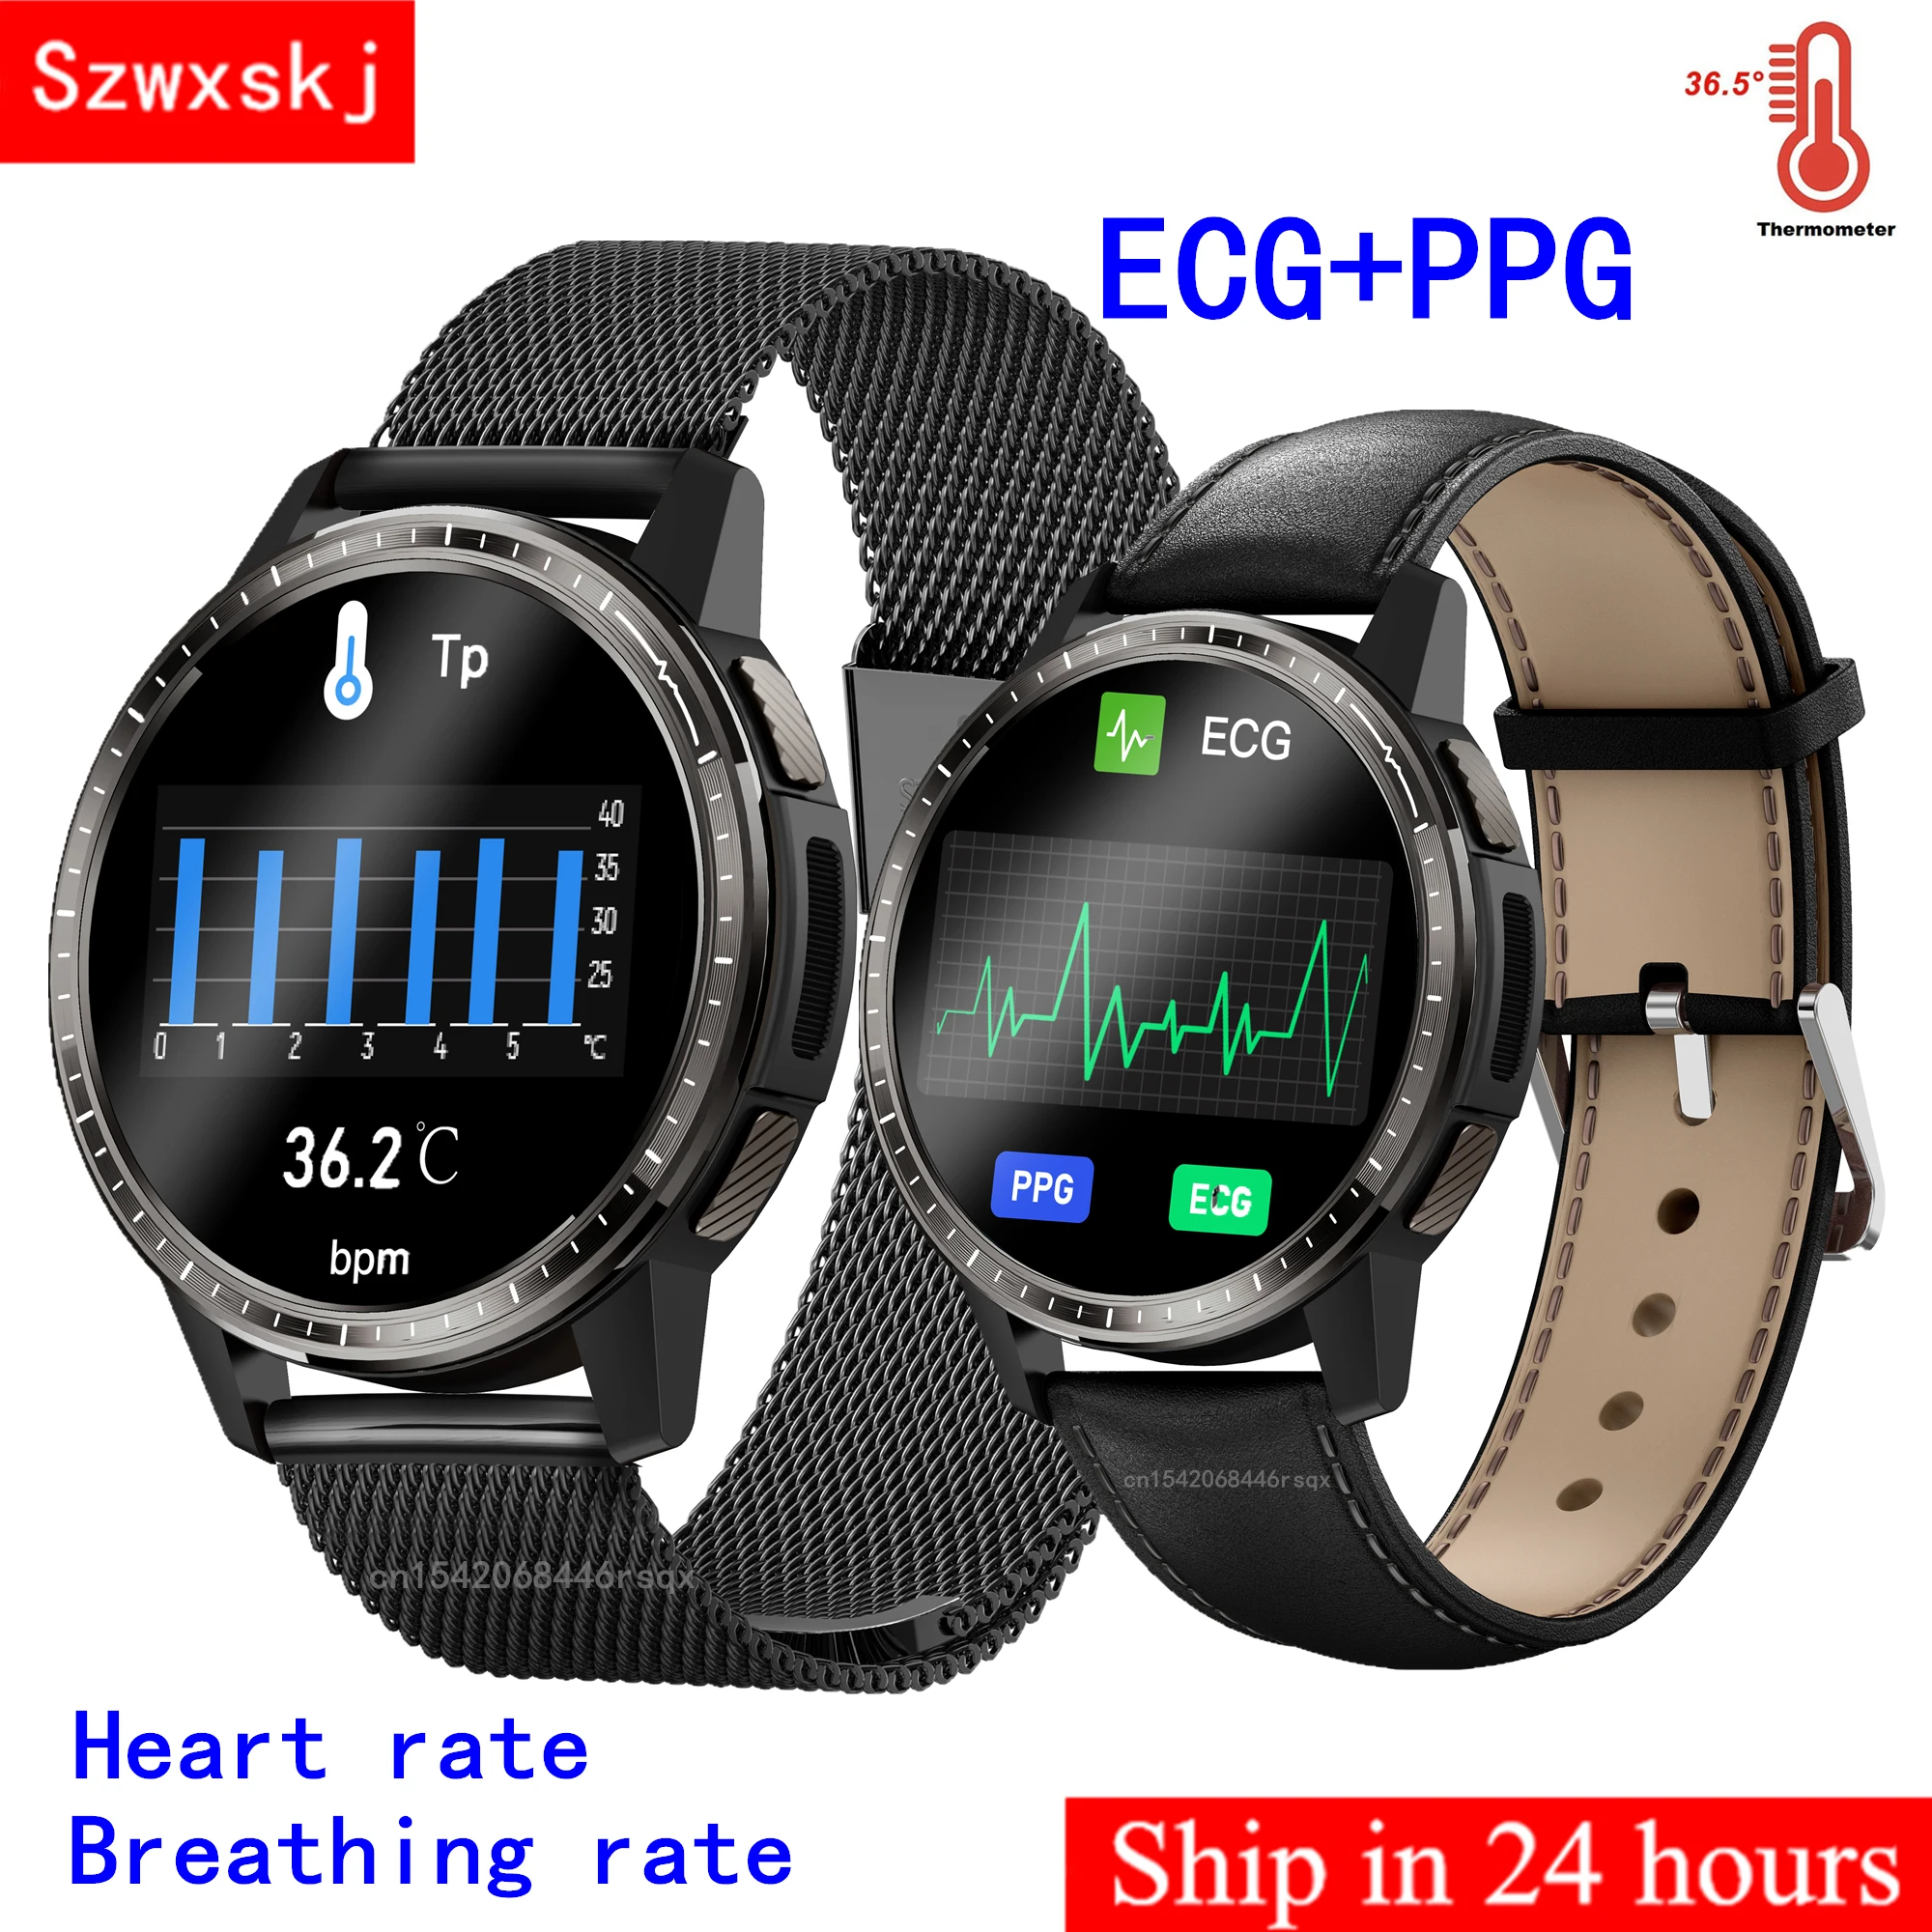 

H9 Smart Watch 24 Hour Heart Rate Blood Pressure Blood Oxygen Breathing Rate ECG+PPG Body Temperature Monitoring Men Women Watch